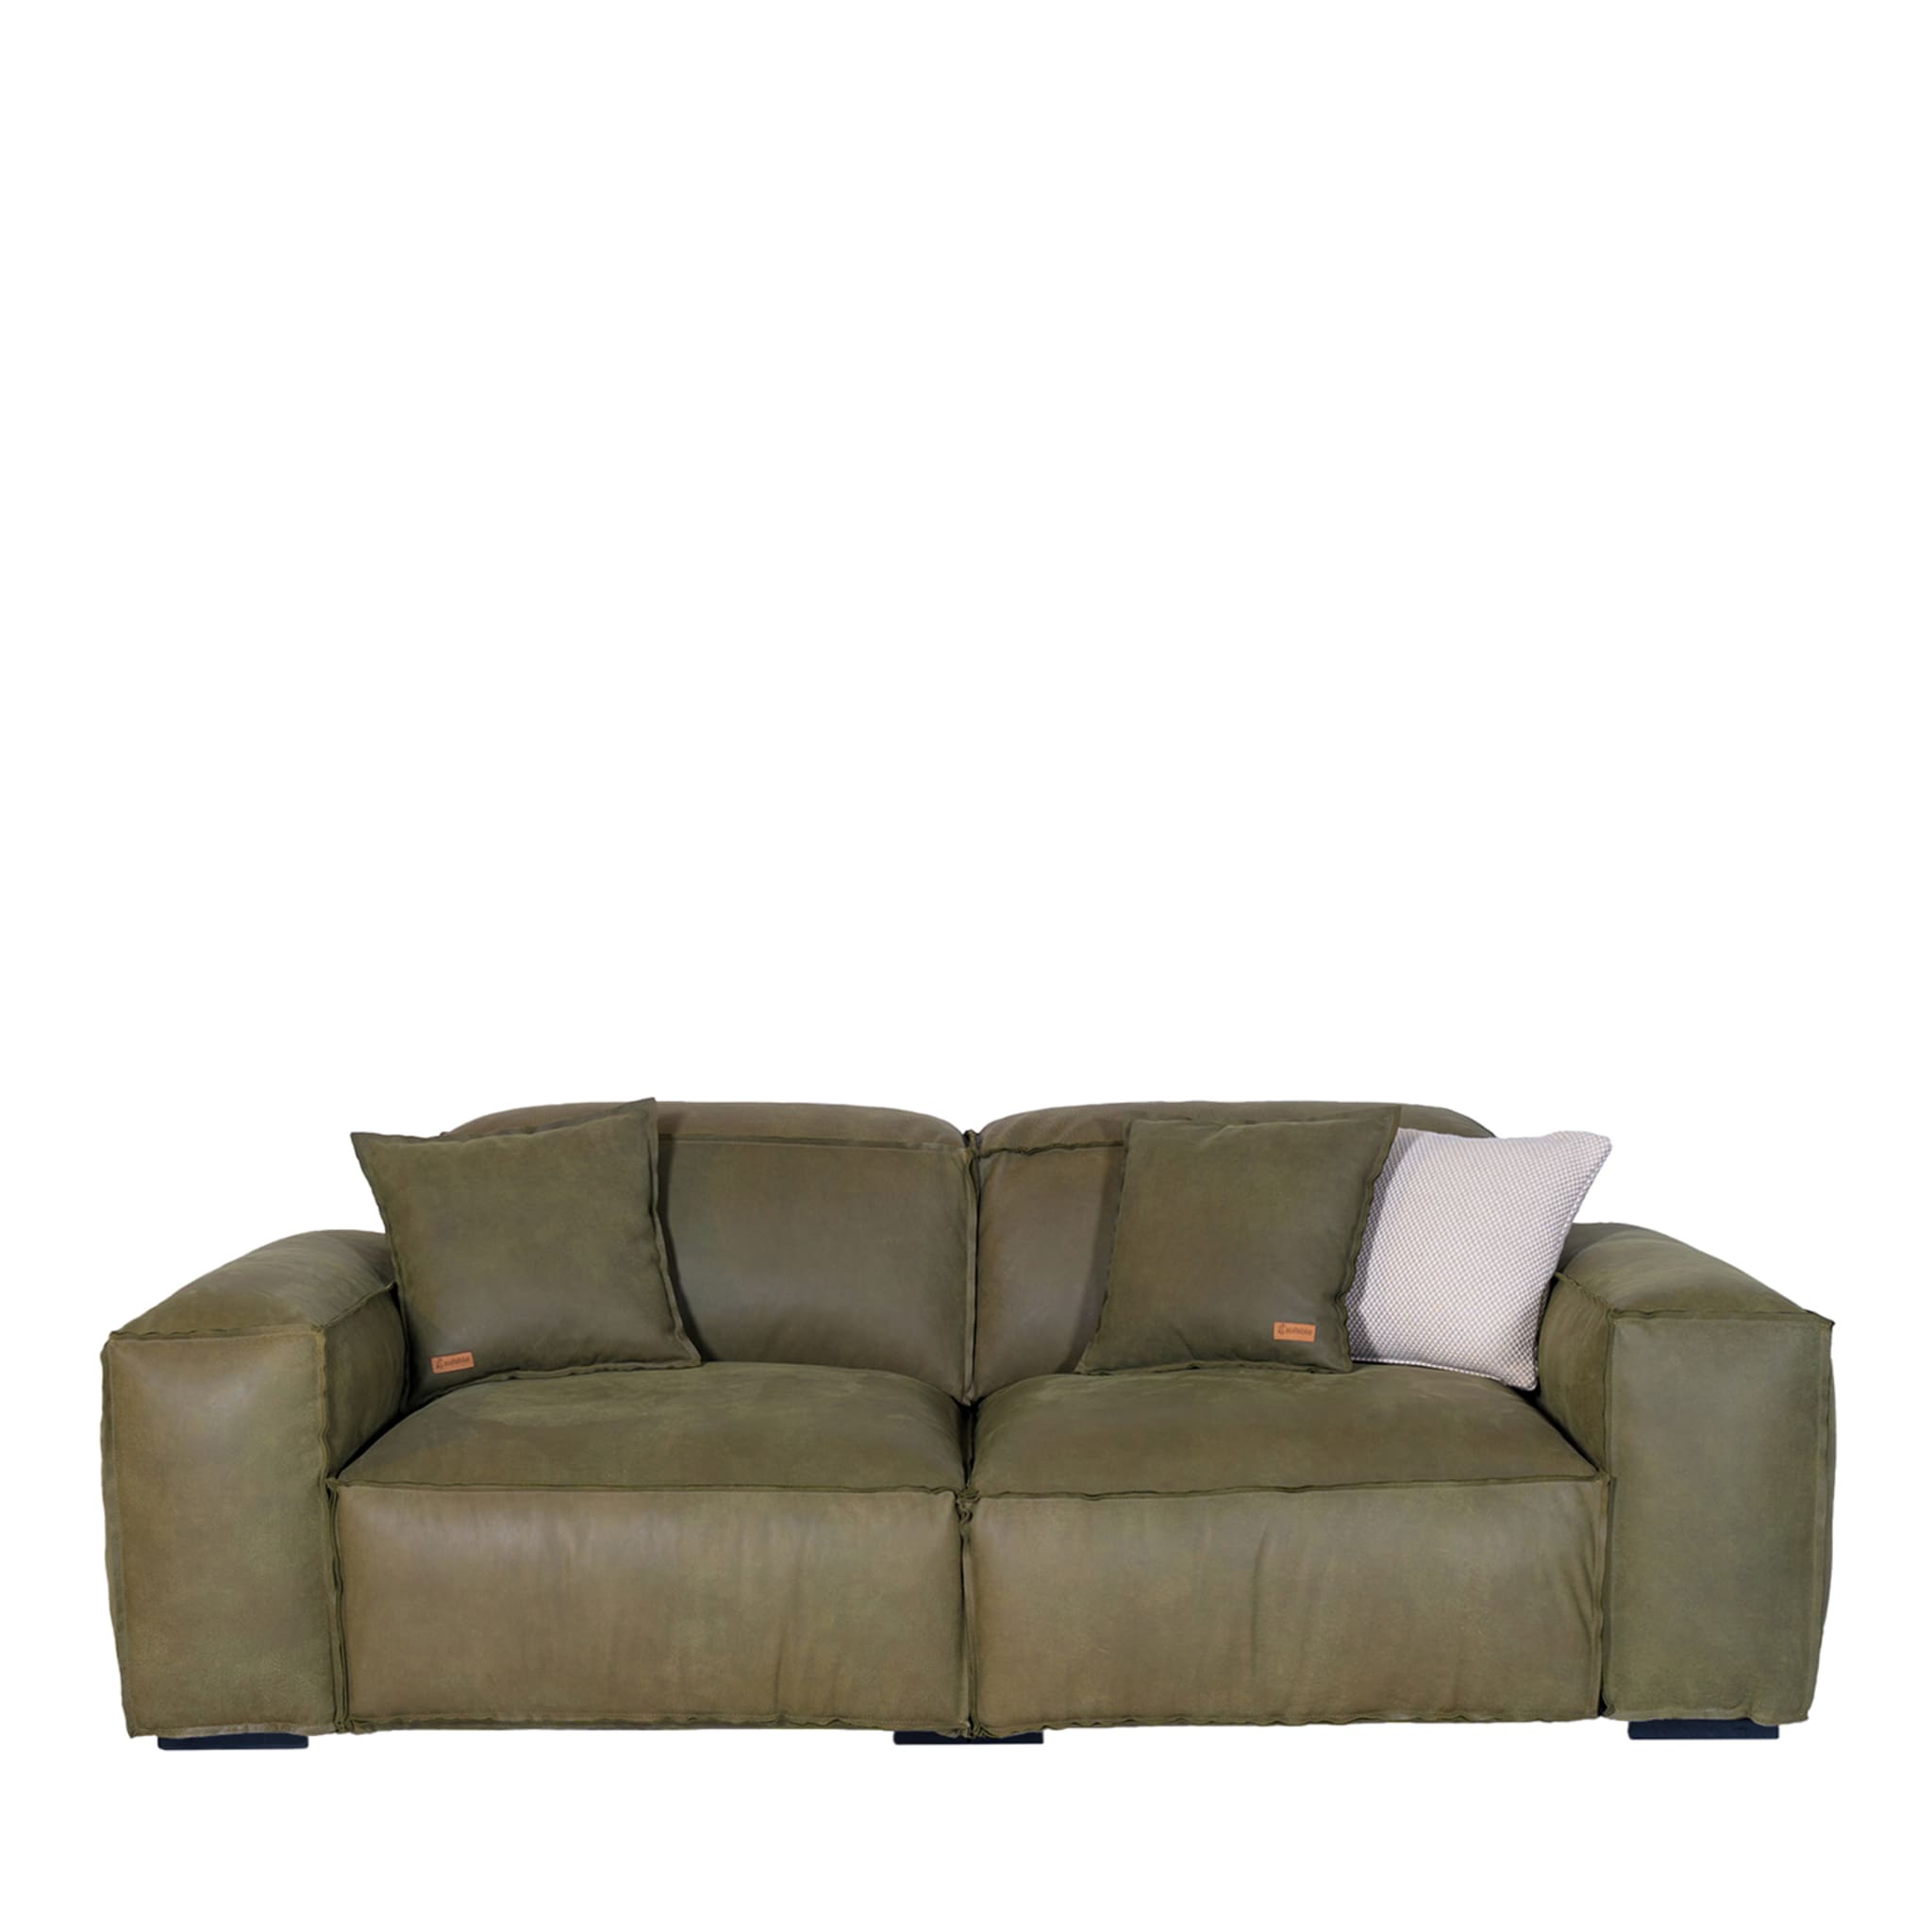 Placido Green Leather 2-Seater Maxi Sofa Tribeca collection - Main view